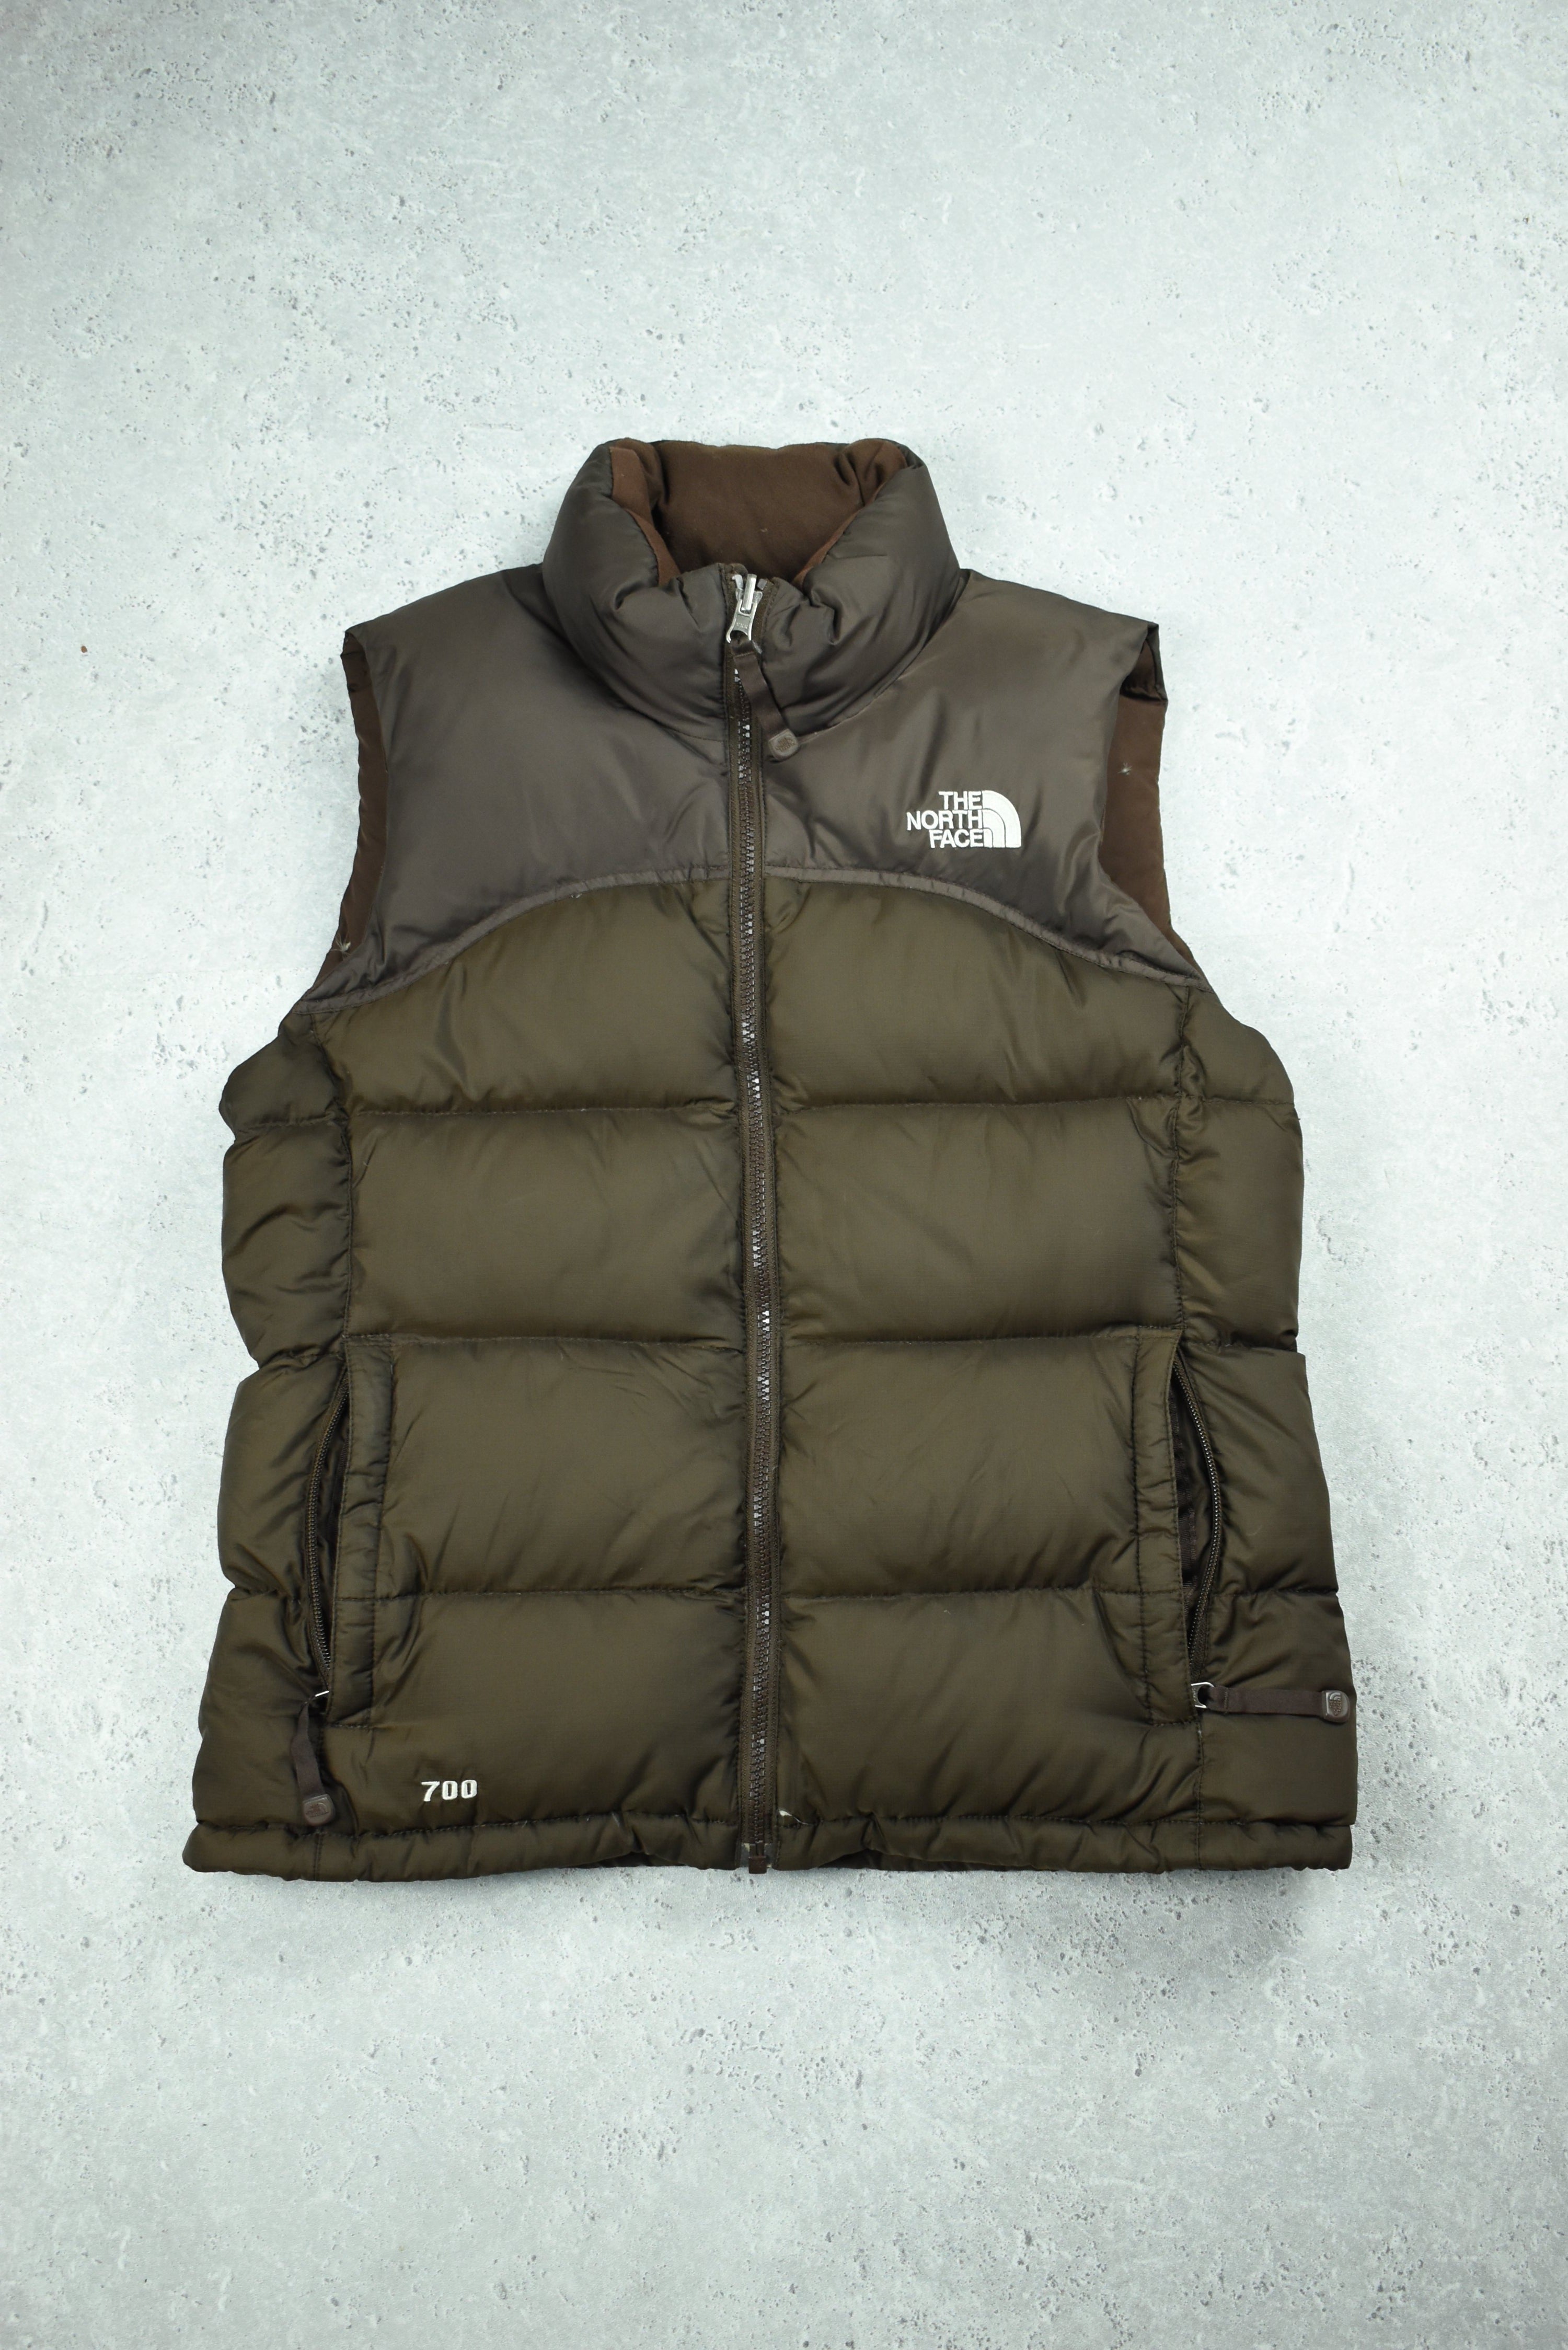 Vintage Rare North Face Brown 700 Vest Womens Small